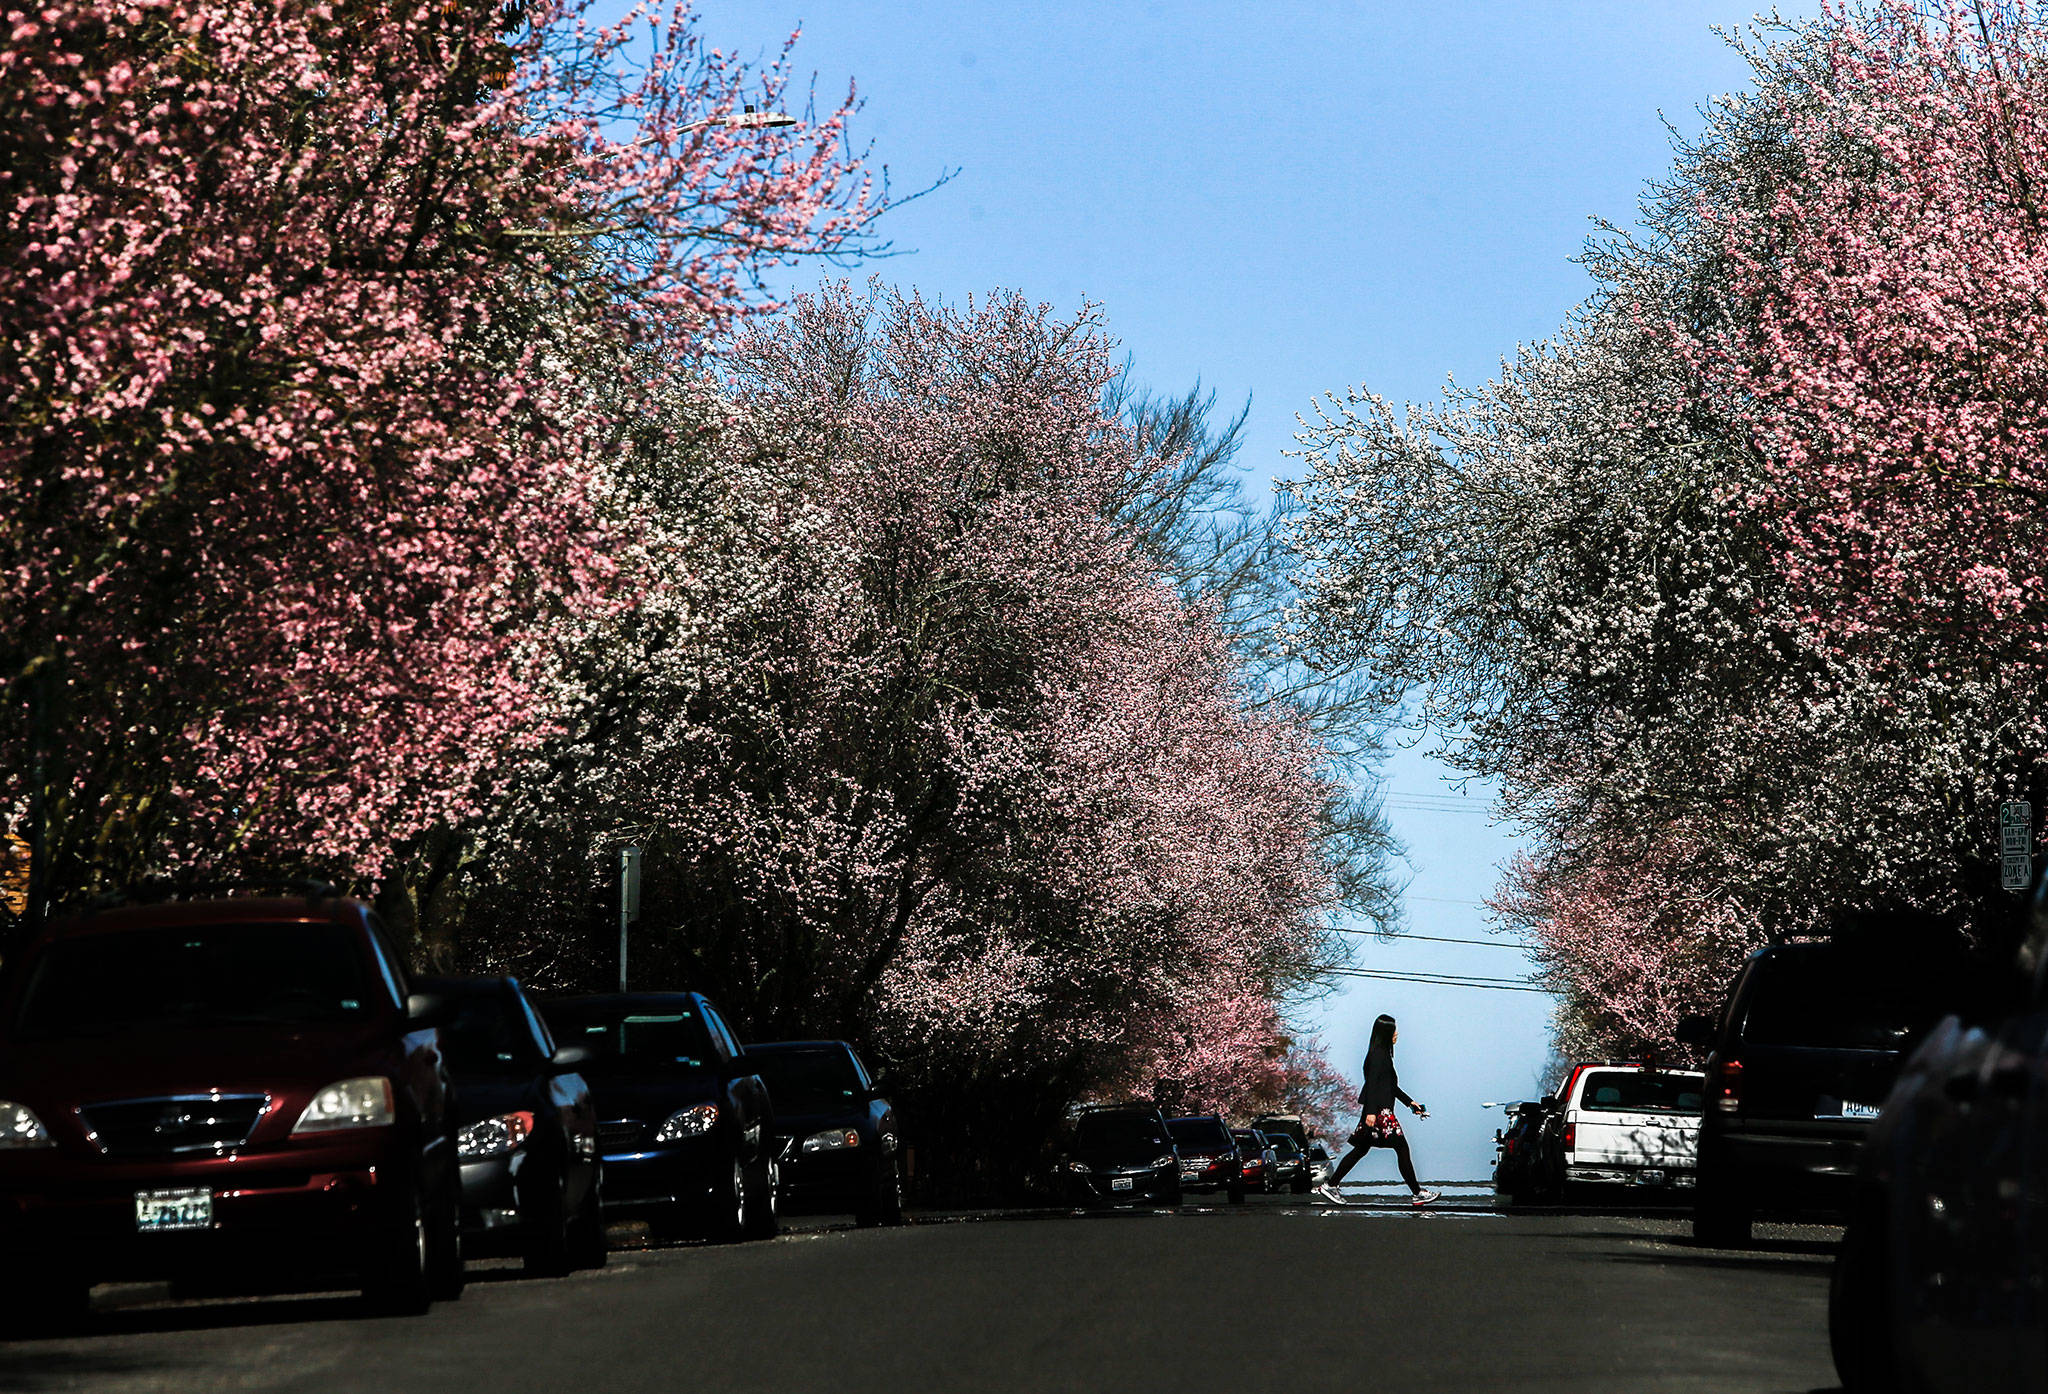 A woman walks along 12th Street as trees begin to blossom in the sun on Hoyt Avenue on Tuesday. (Olivia Vanni / The Herald)